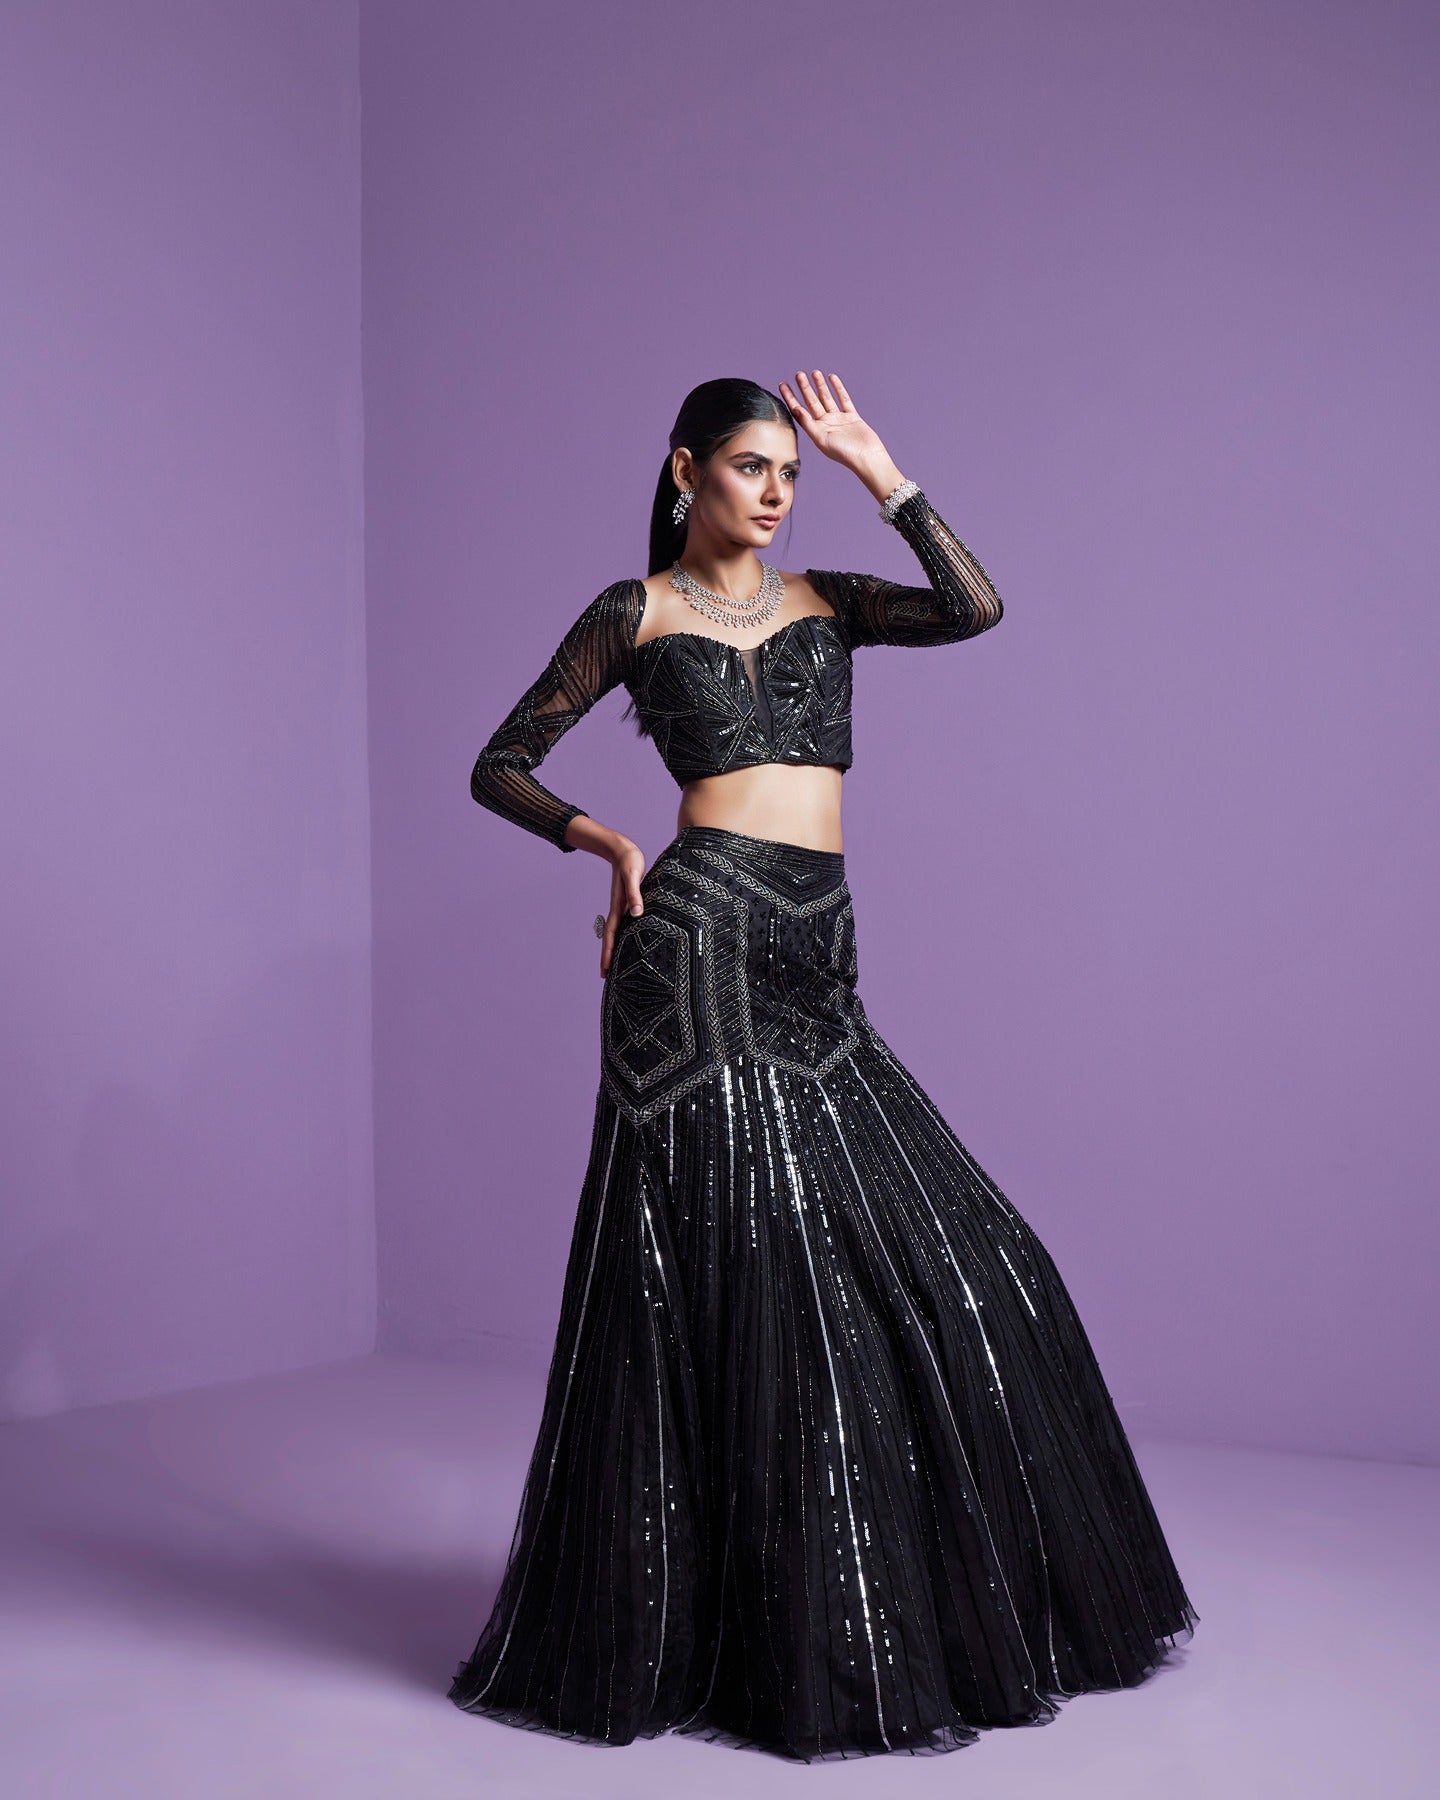 In the realm of elegance, black speaks volumes. Adorned in mystery, this black lehenga weaves a tale of timeless sophistication and enchanting allure. Embrace the dark glamour. 